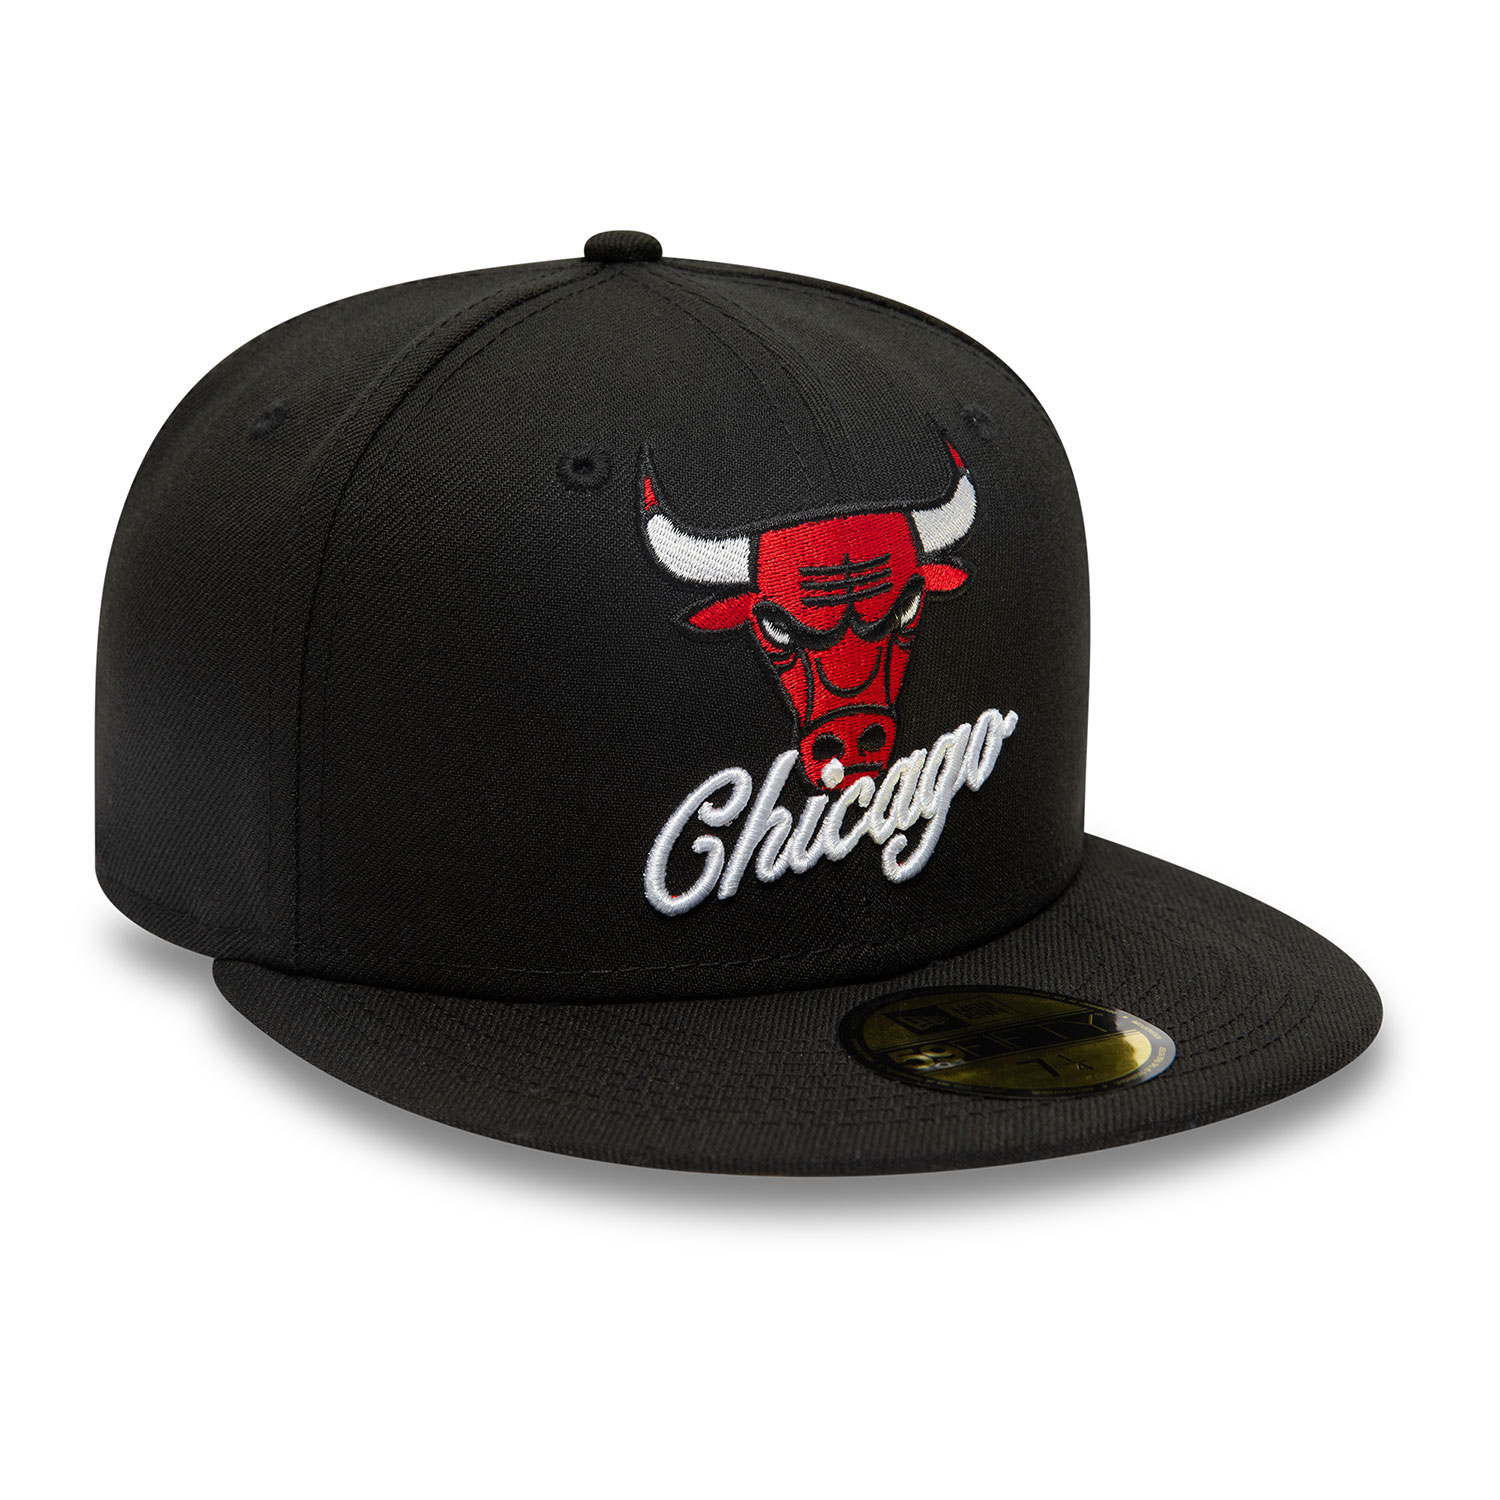 Chicago Bulls Dual Logo Black 59FIFTY Fitted Cap